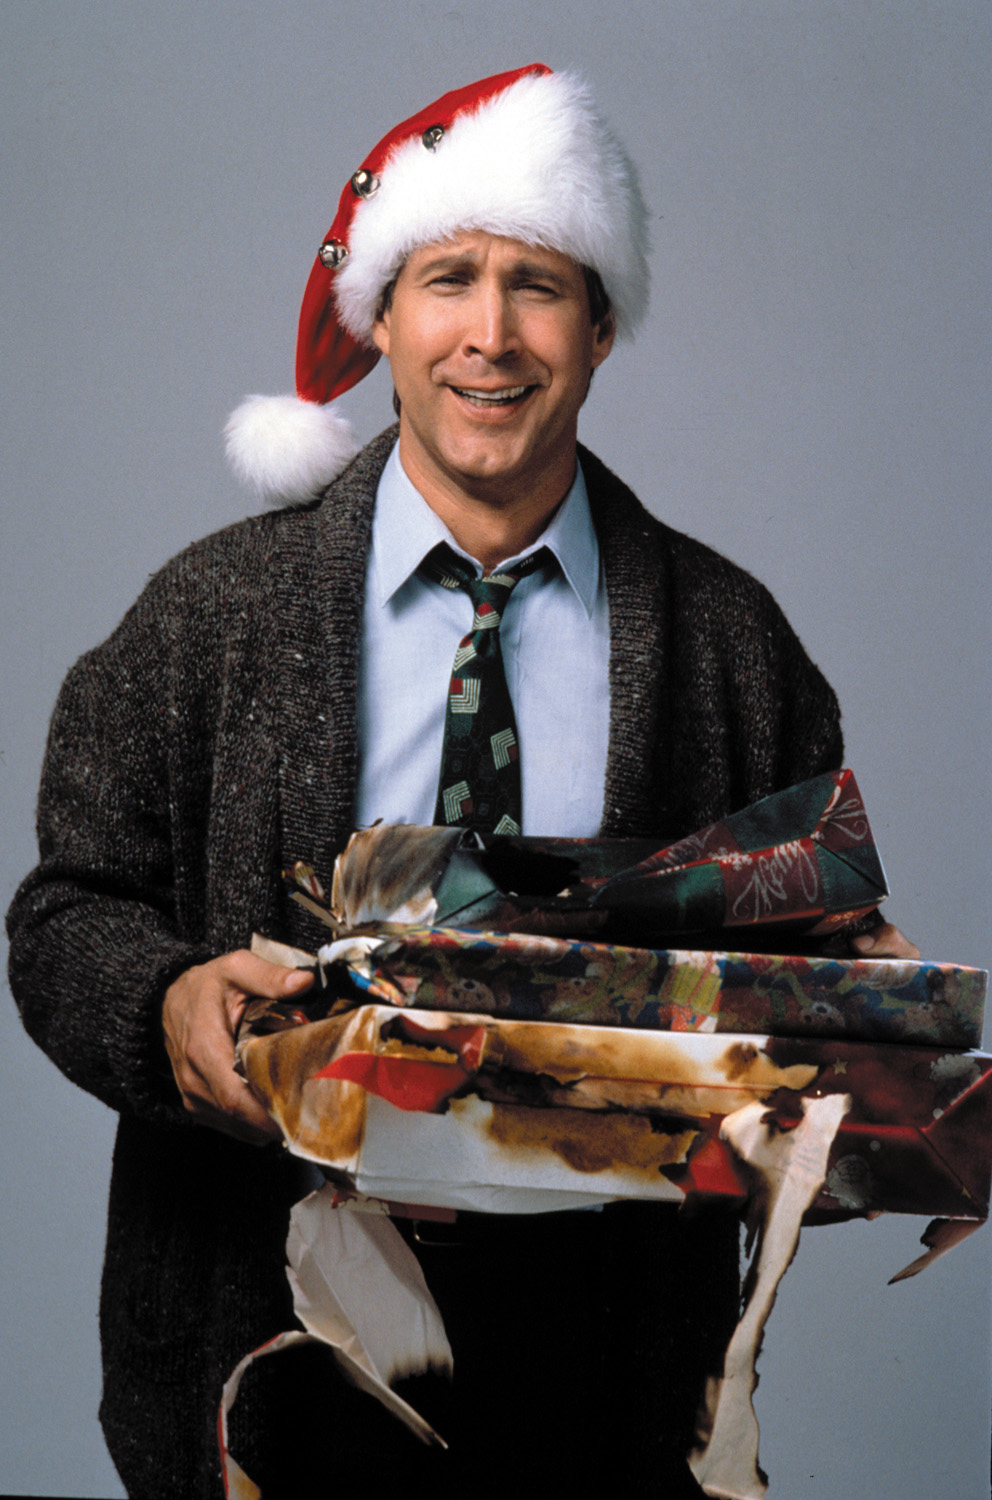 Gallery For gt; Chevy Chase Christmas Vacation